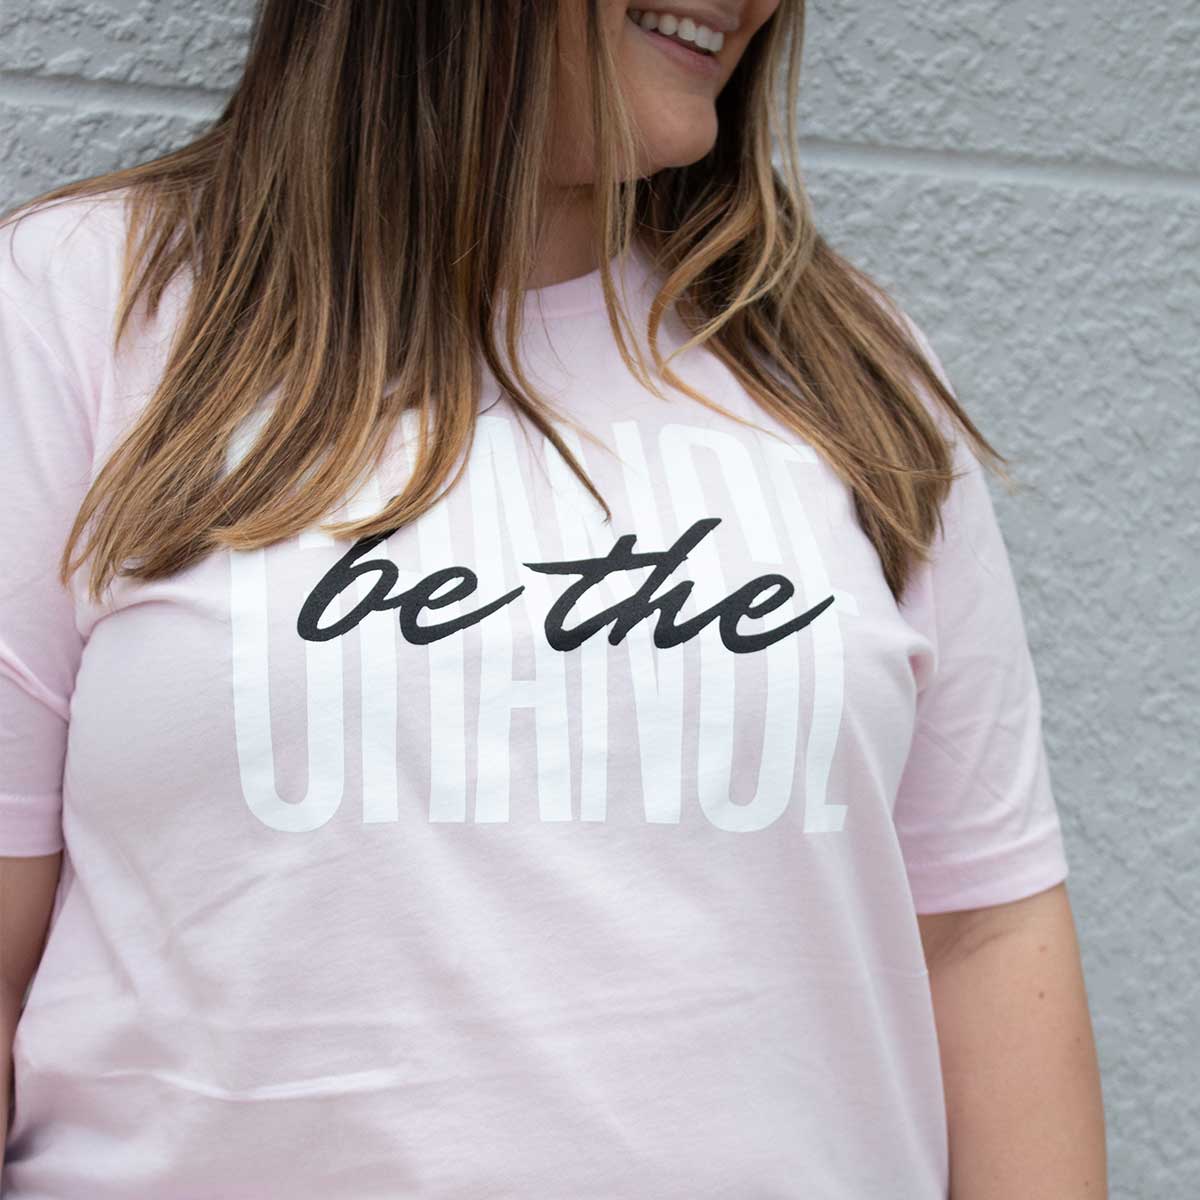 T-shirt for sale that reads "be the CHANGE"